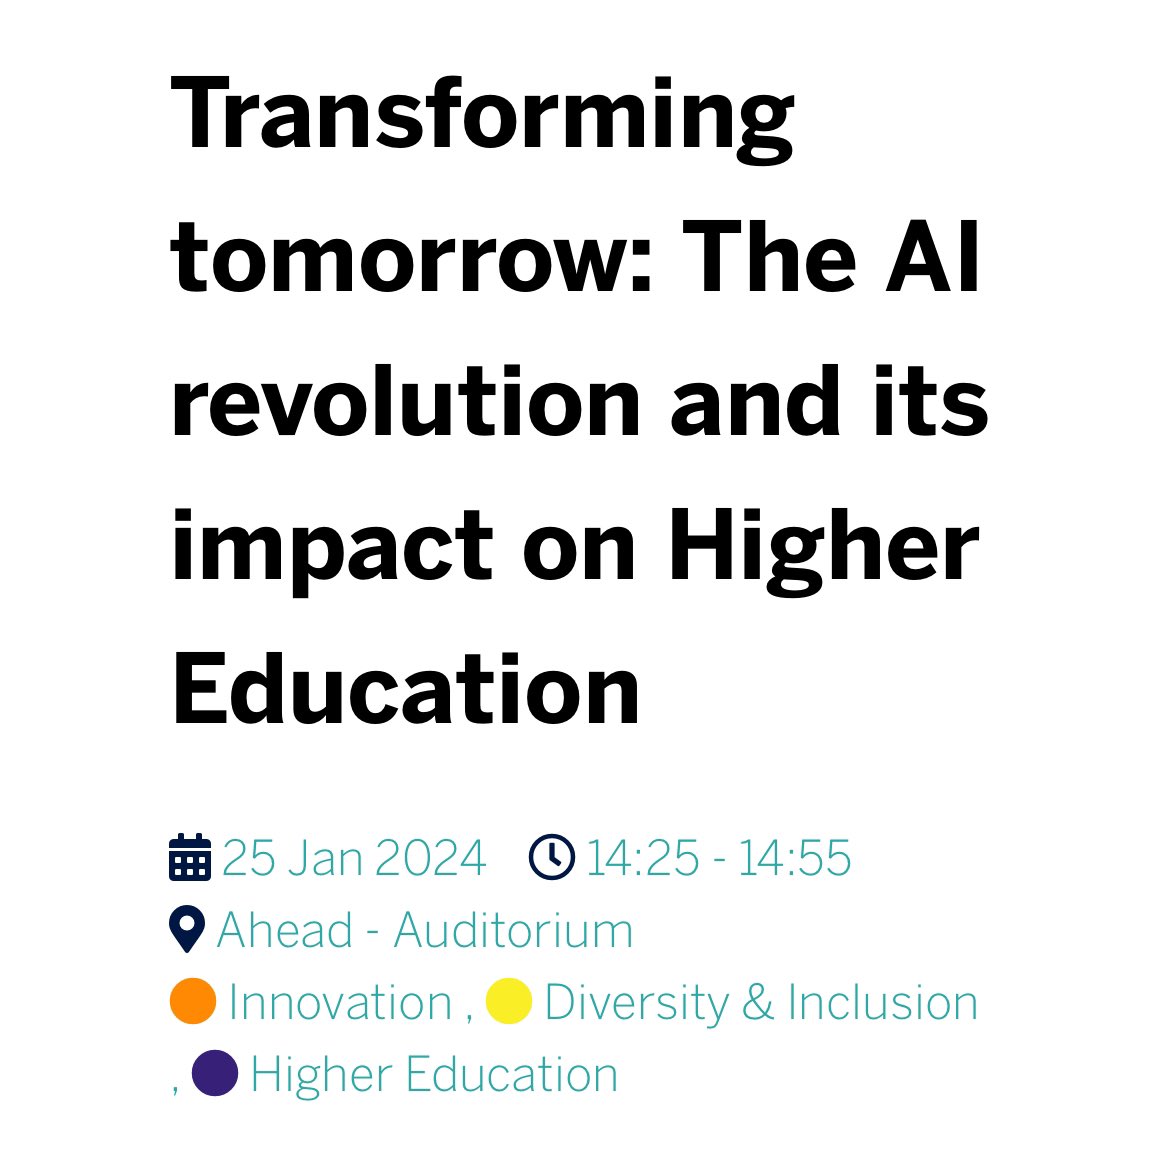 Extremely excited for the opportunity today to share the stage with @massimochi from @lenovoitalia at @Bett_show to talk about #AI and its impact in #HigherEducation If you’re here at #Bett2024 pls come and join us at the Ahead Auditorium at 2:45 PM cc/ @Lenovo @anacondainc